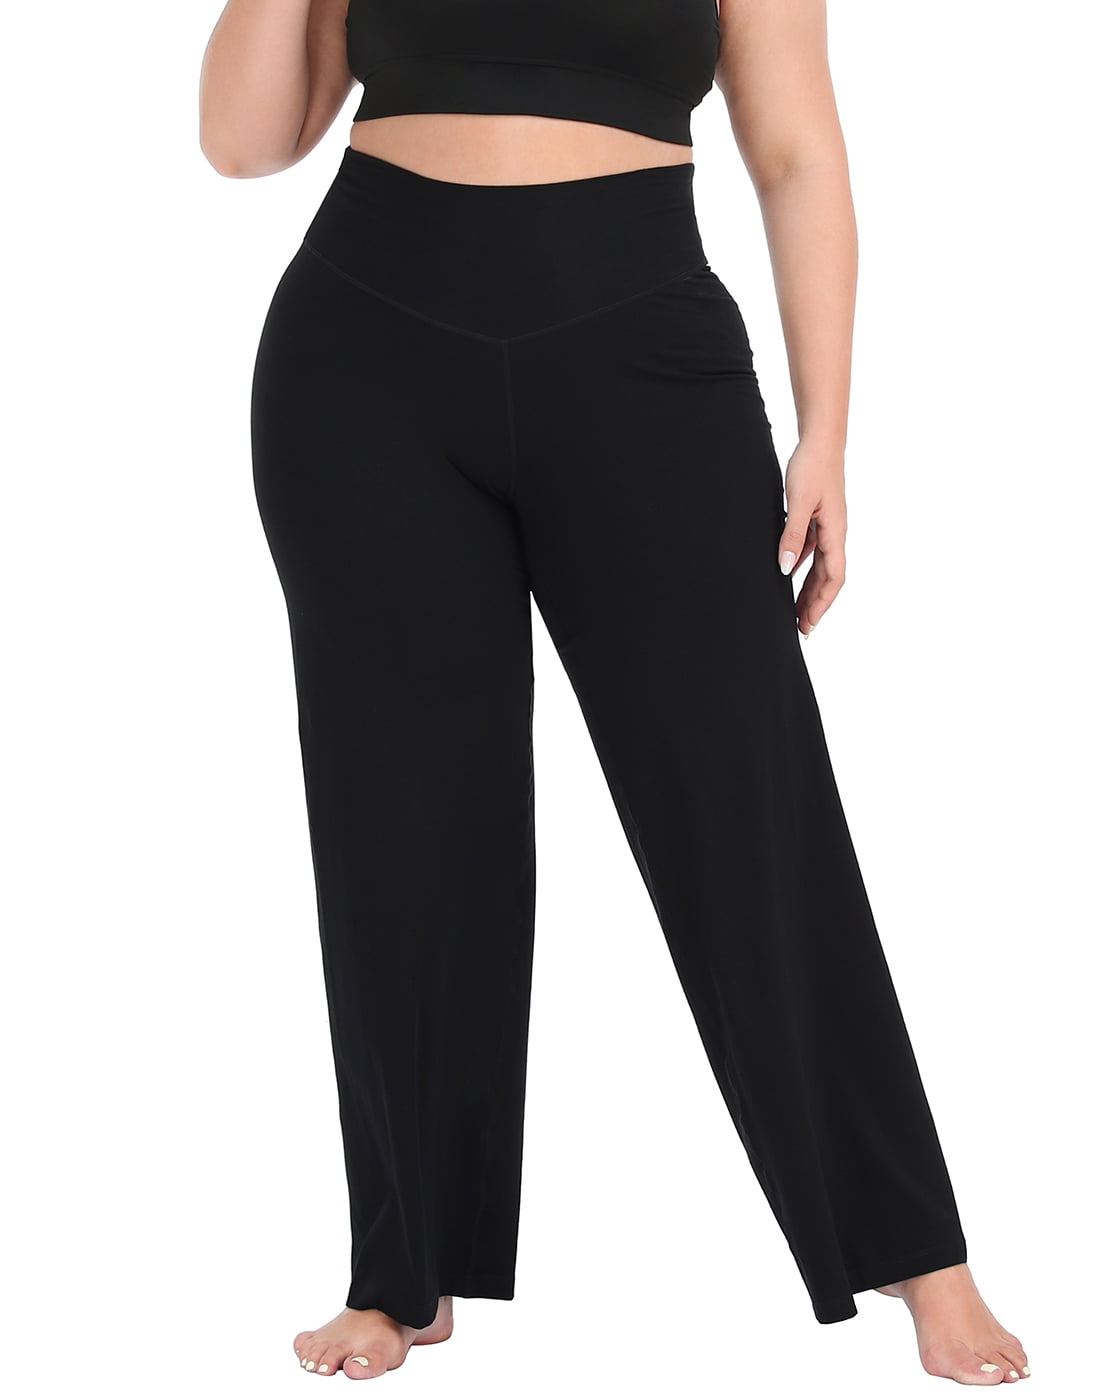 As a 5'11 girl with 45 legs buying pants is my biggest ragethese are  regular yoga pants that I bought one size up so theyre too big around my  waist and 4